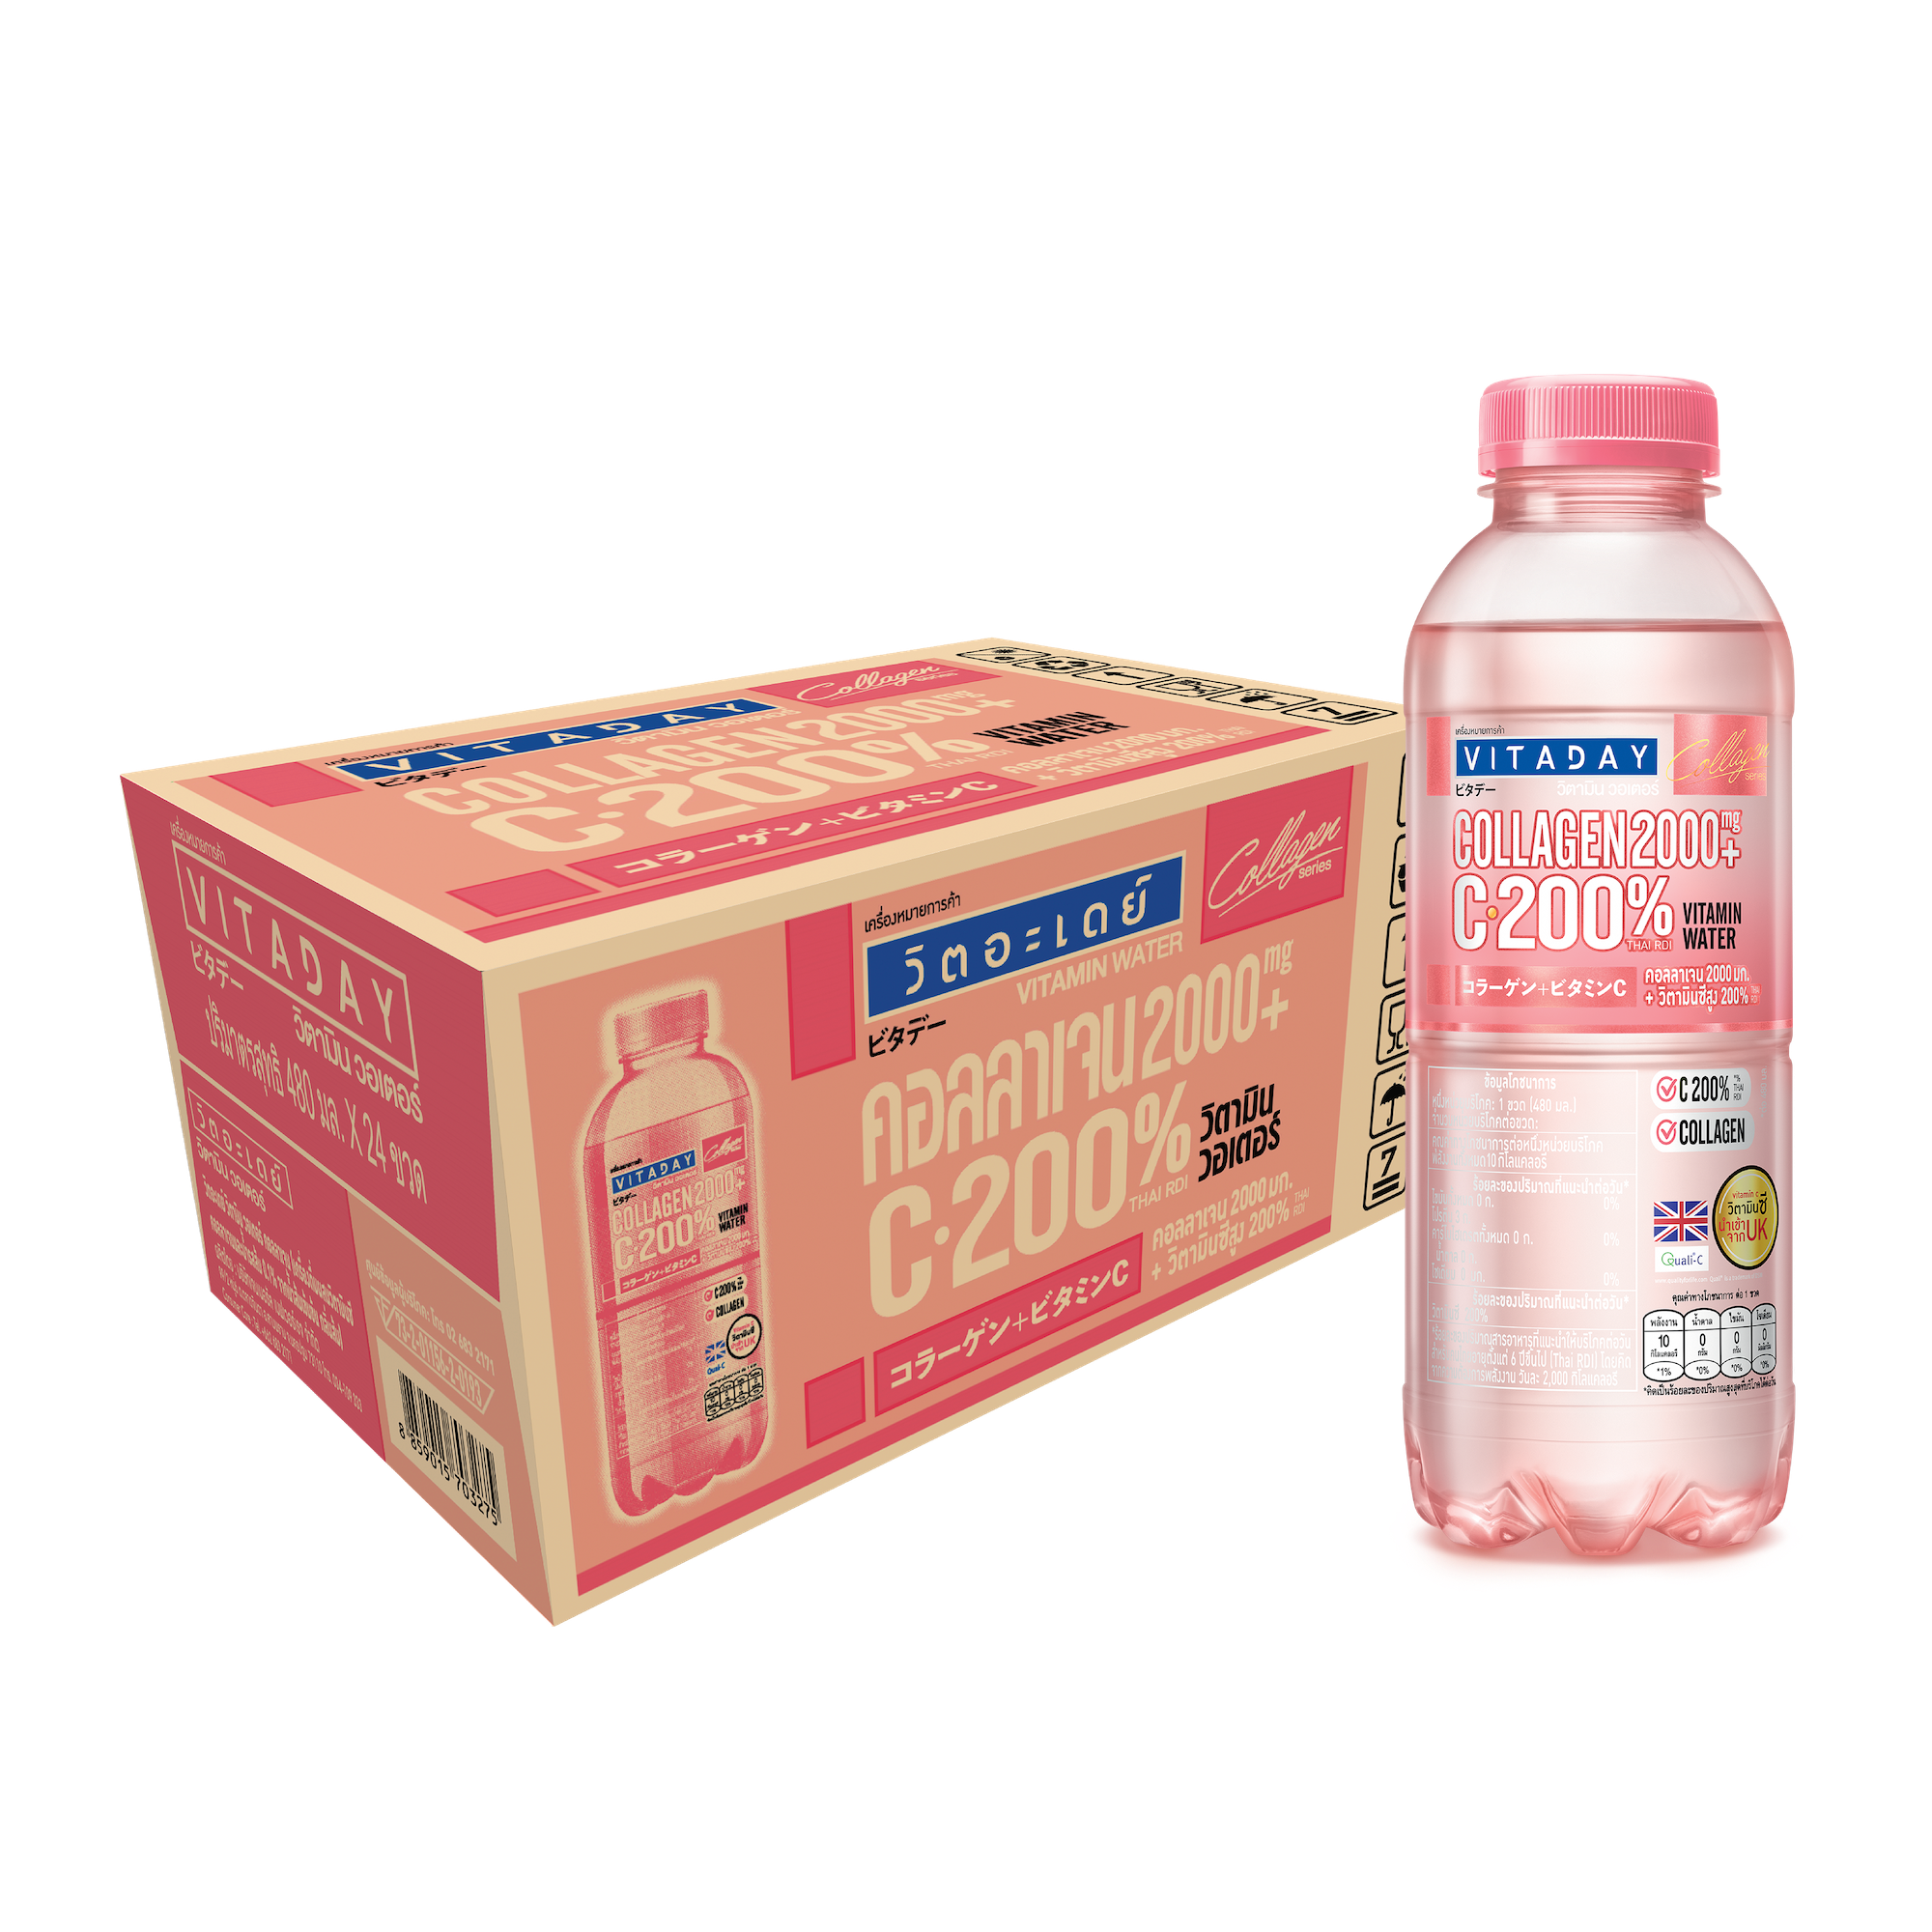 Vit A Day Water Vitamin C 200% with Collagen 2,000 mg. from Japan